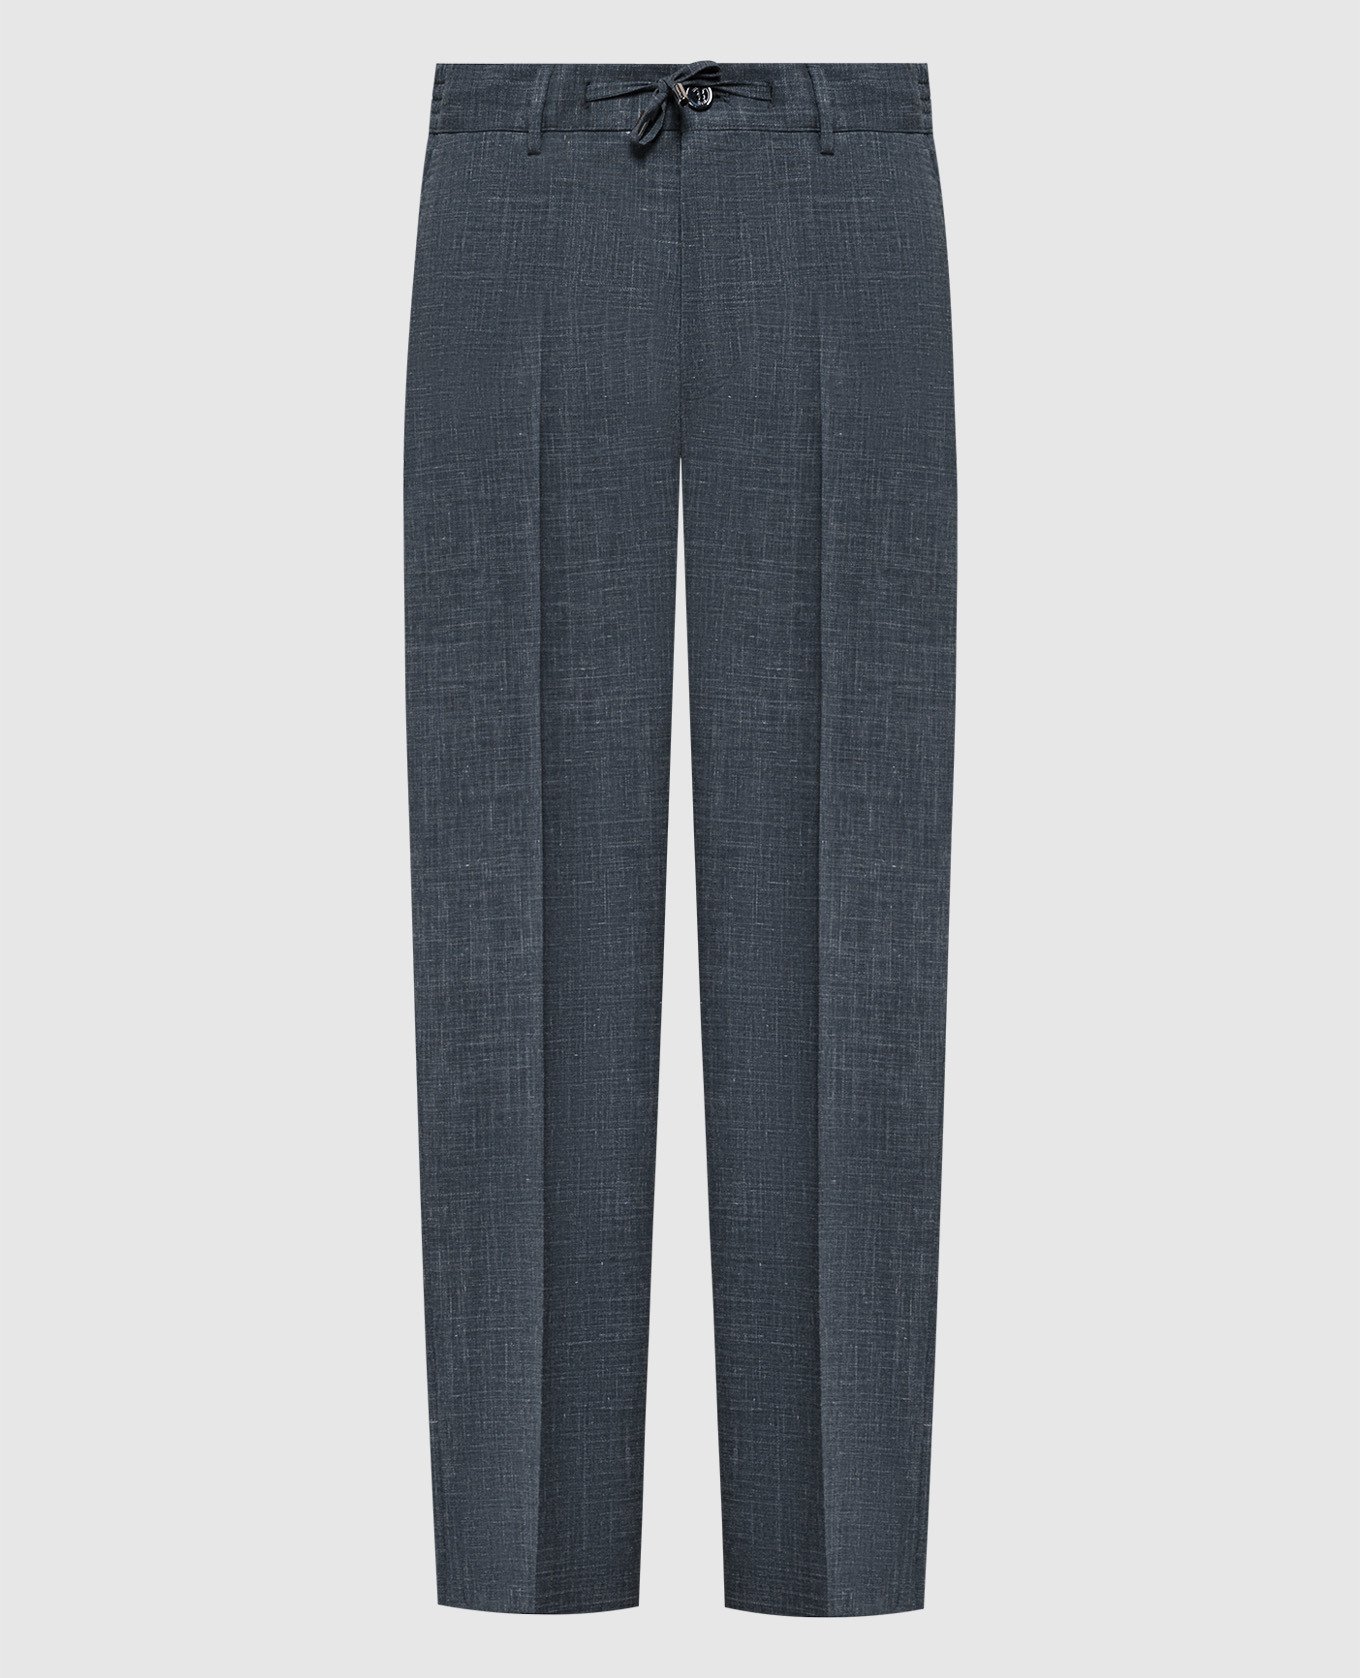 Gray wool and linen trousers with metallic logo